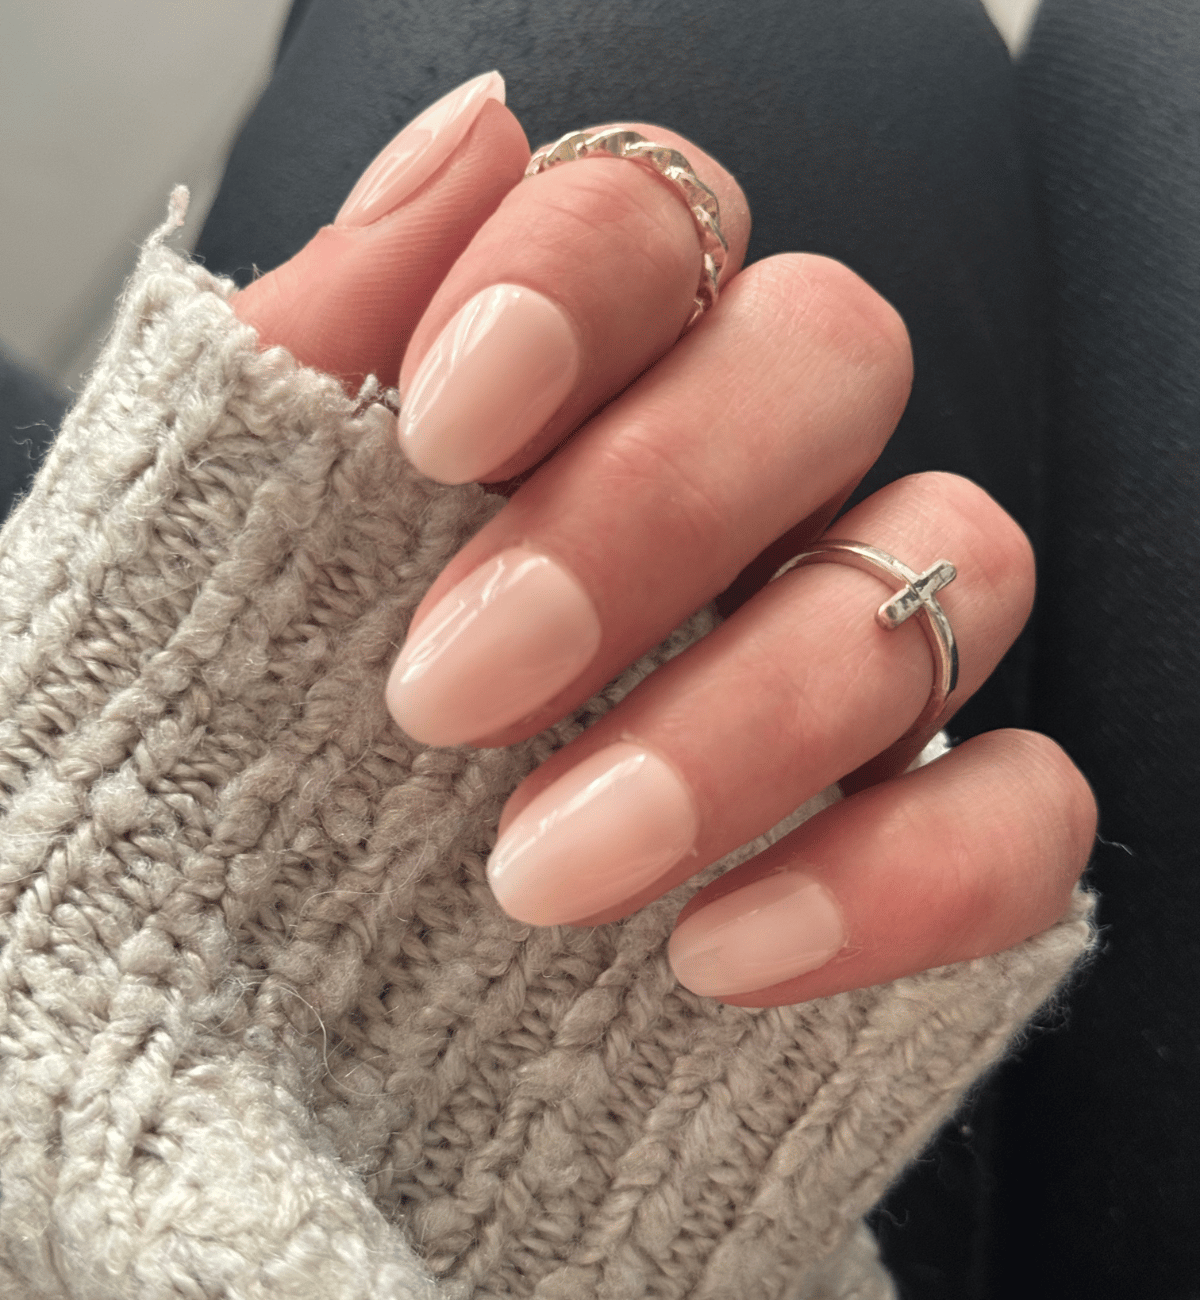 FAUX ONGLES ABRICOT NUDE ARRONDIS COURTS